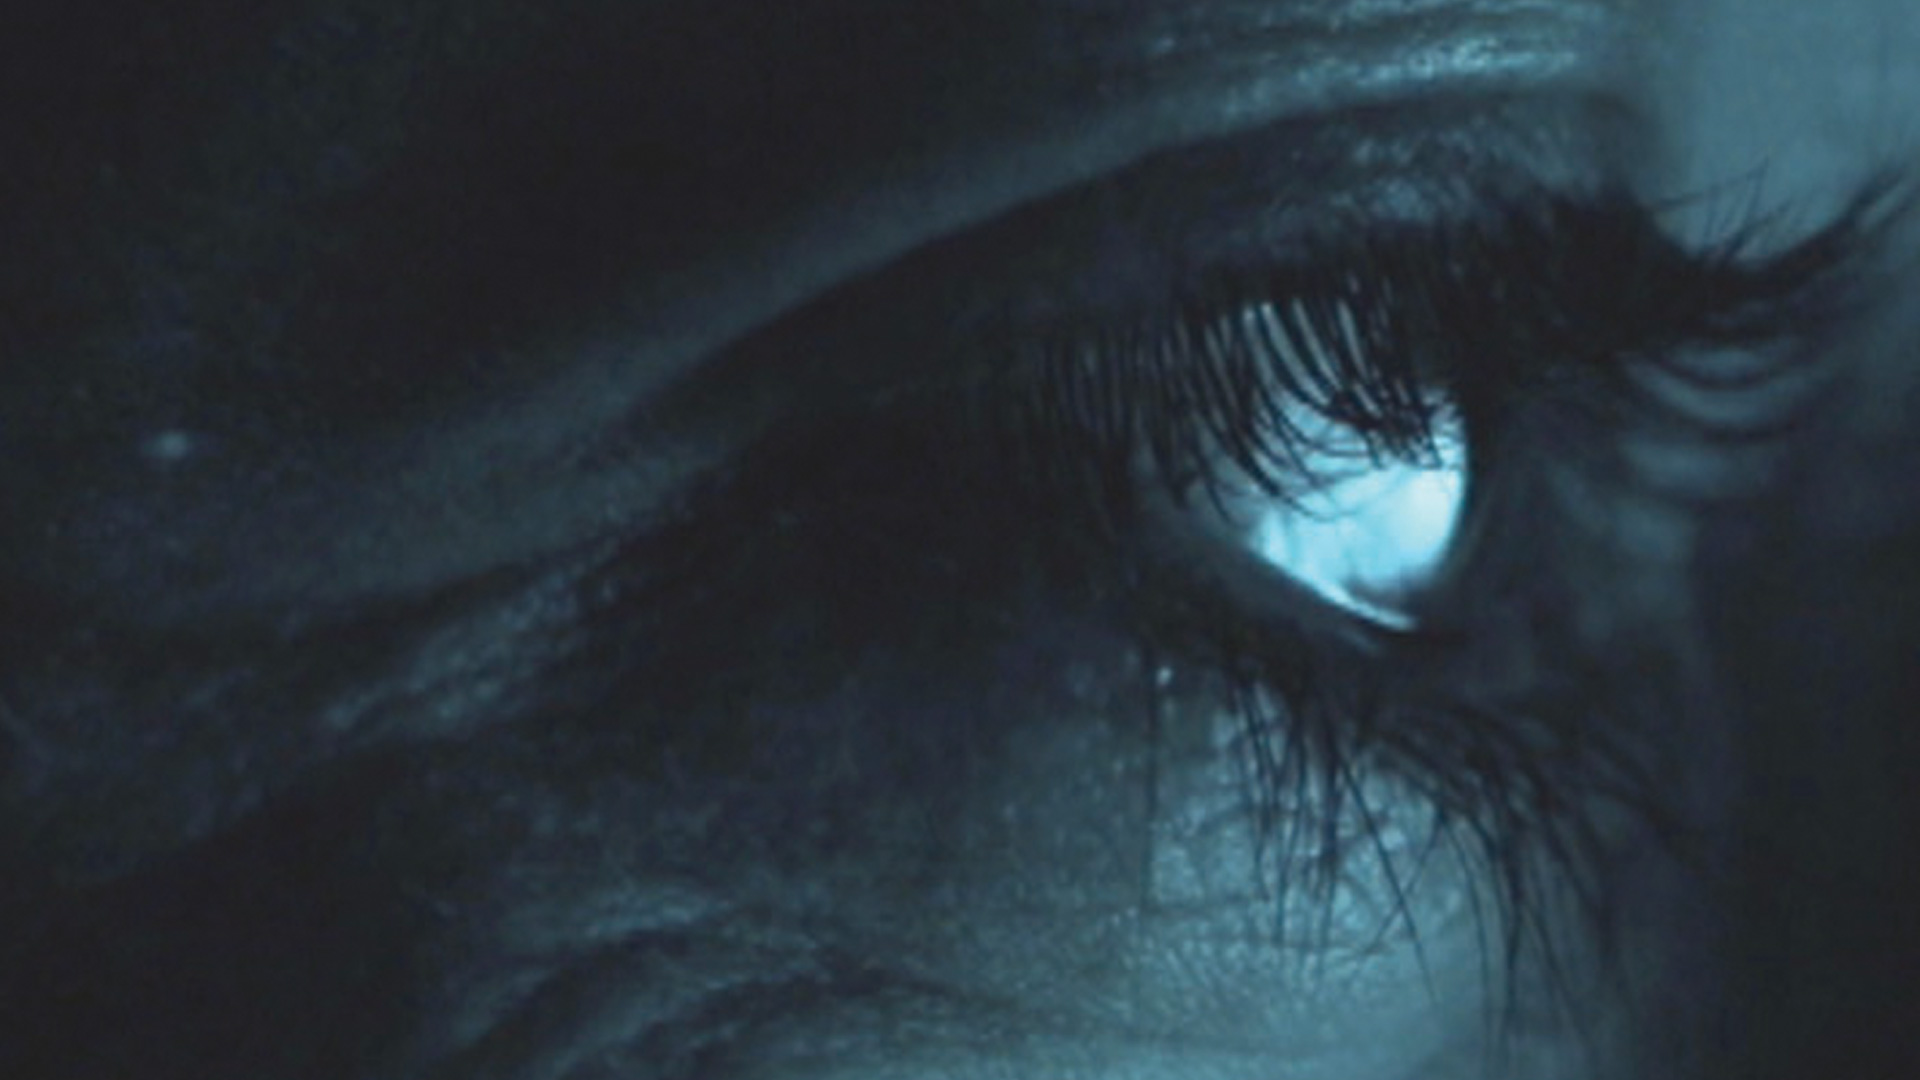 Close up of a woman's eye, seen from the side of her face. The colour image is taken in a dark environment and has dark blue tones.